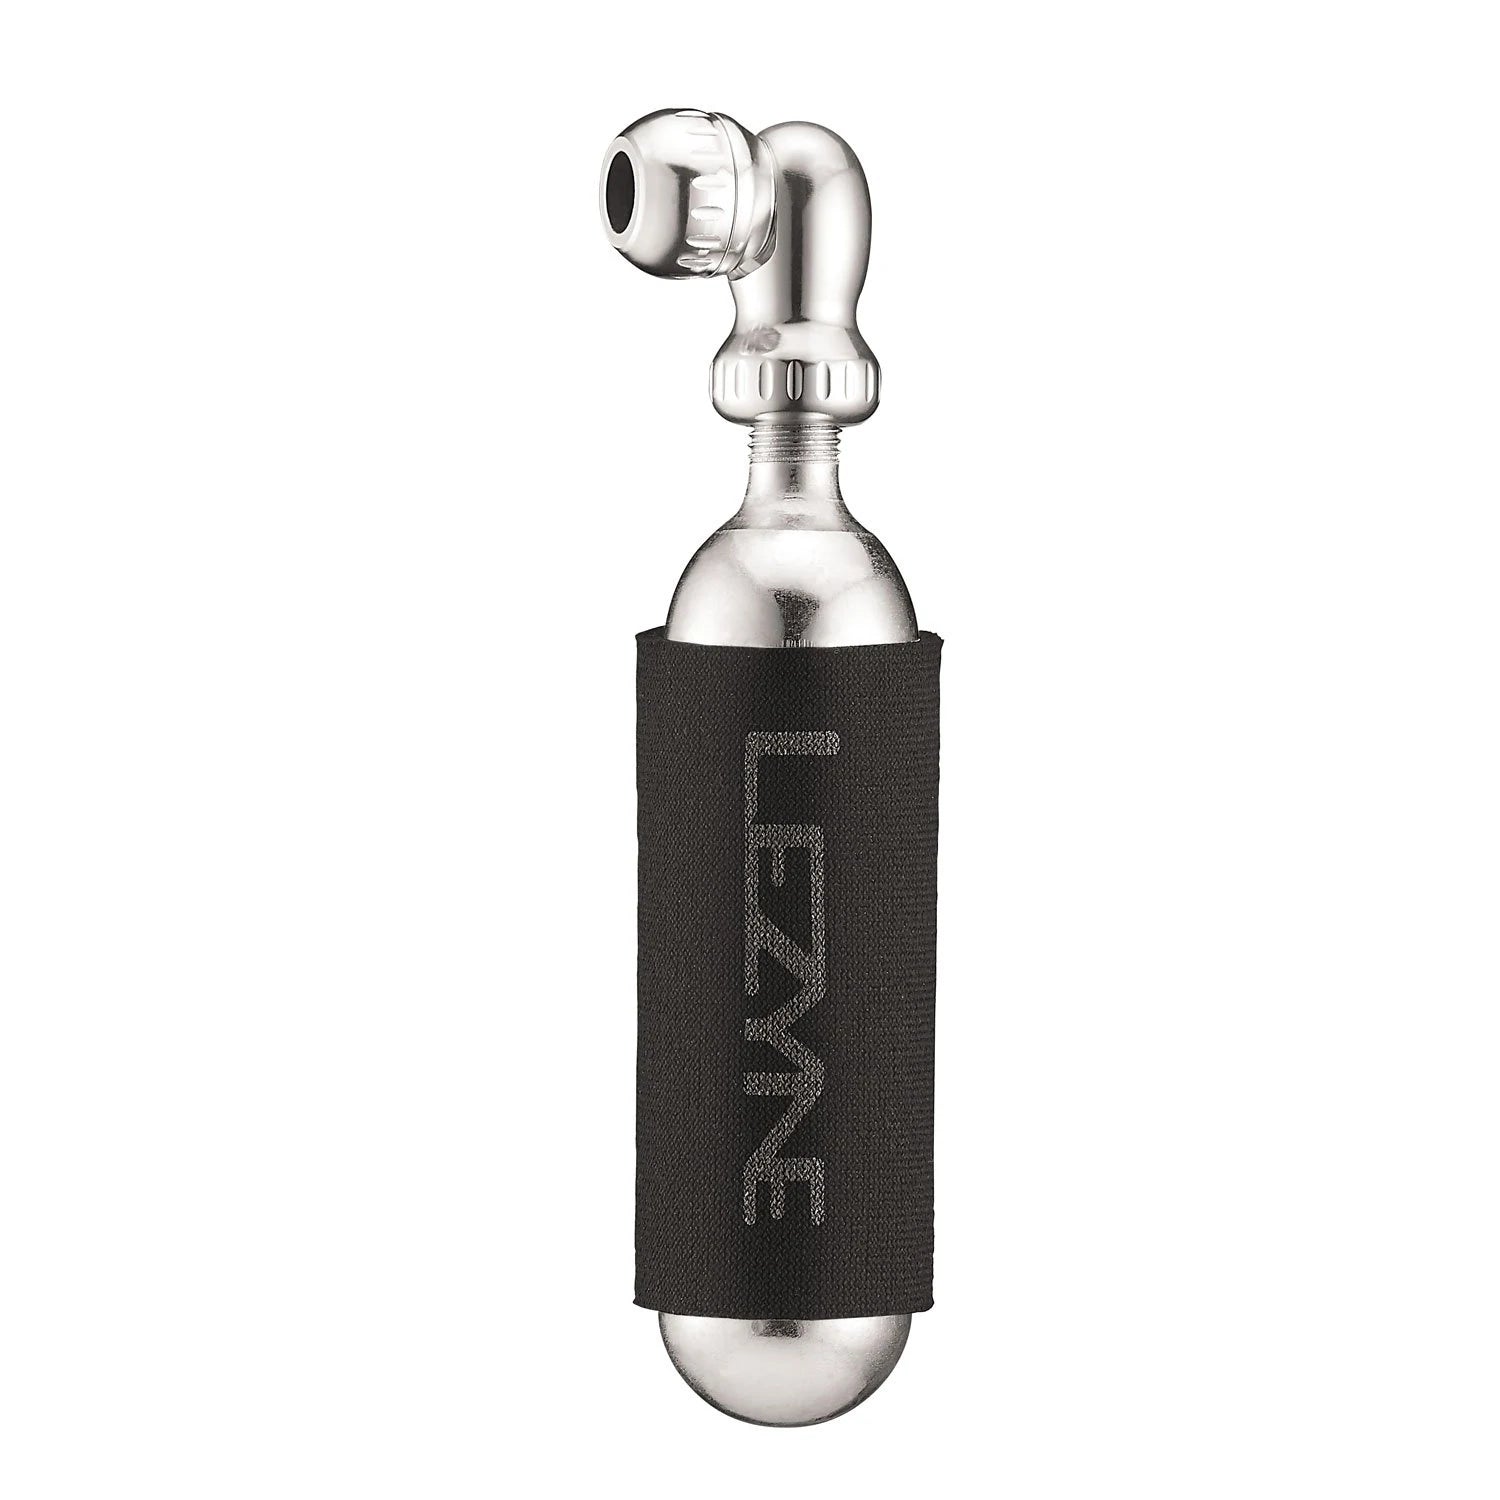 Lezyne Twin Speed Drive Co2 inflator with a white background